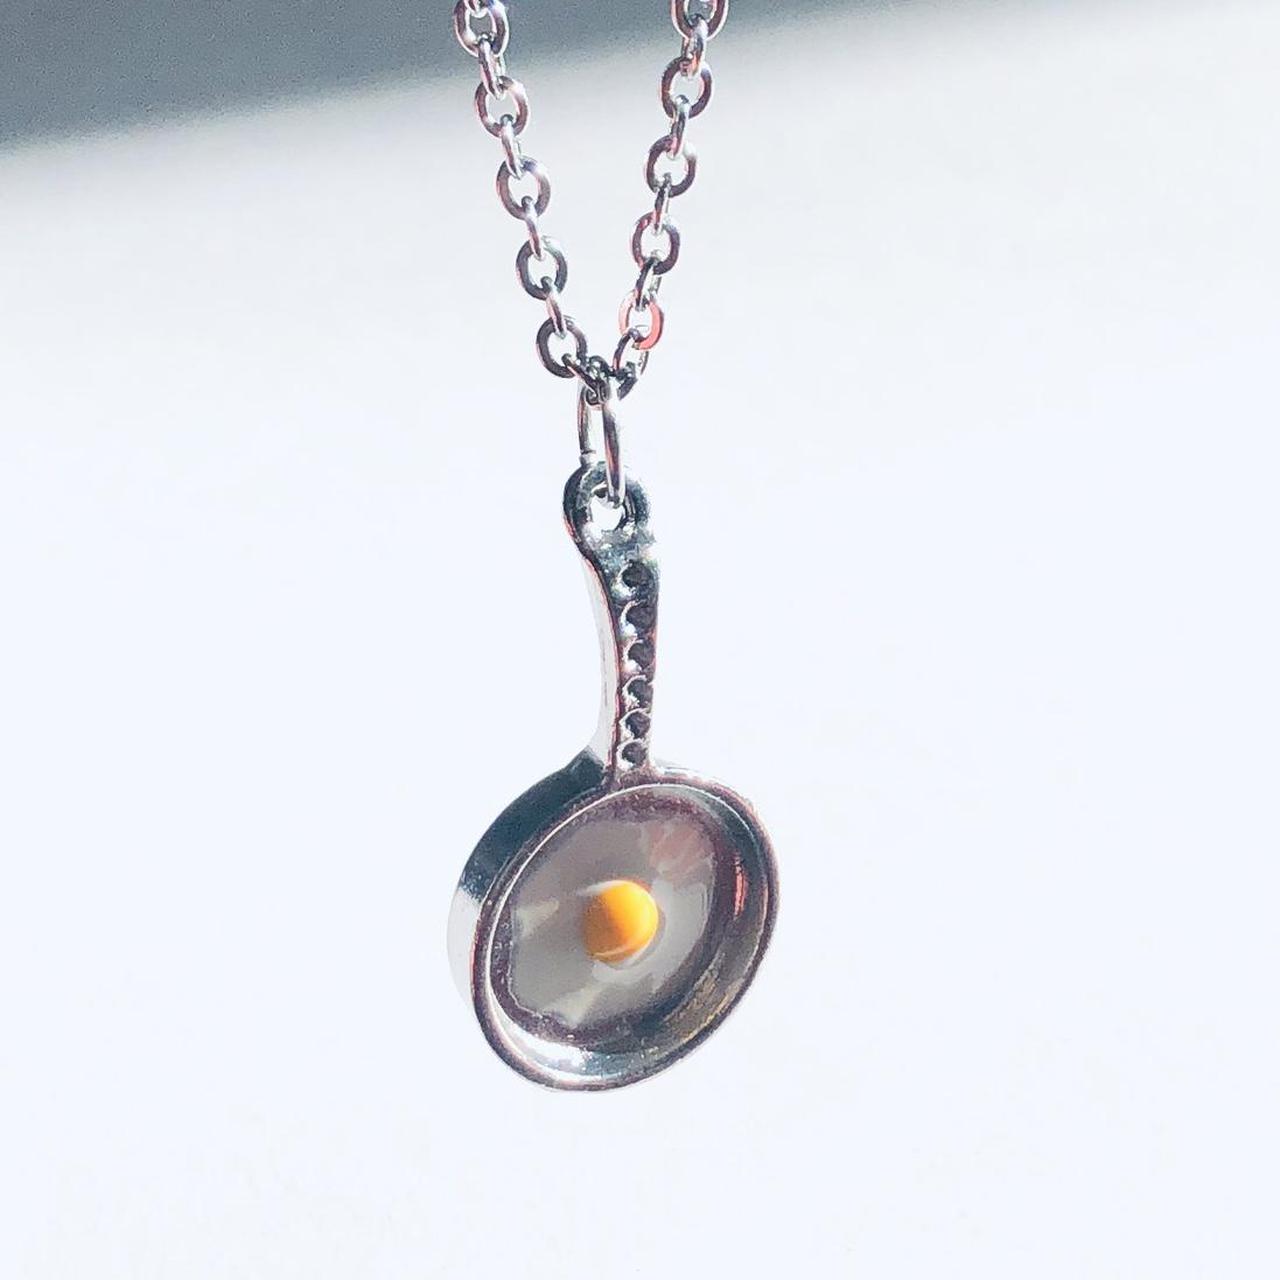 Product Image 1 - Silver frying pan egg necklace,